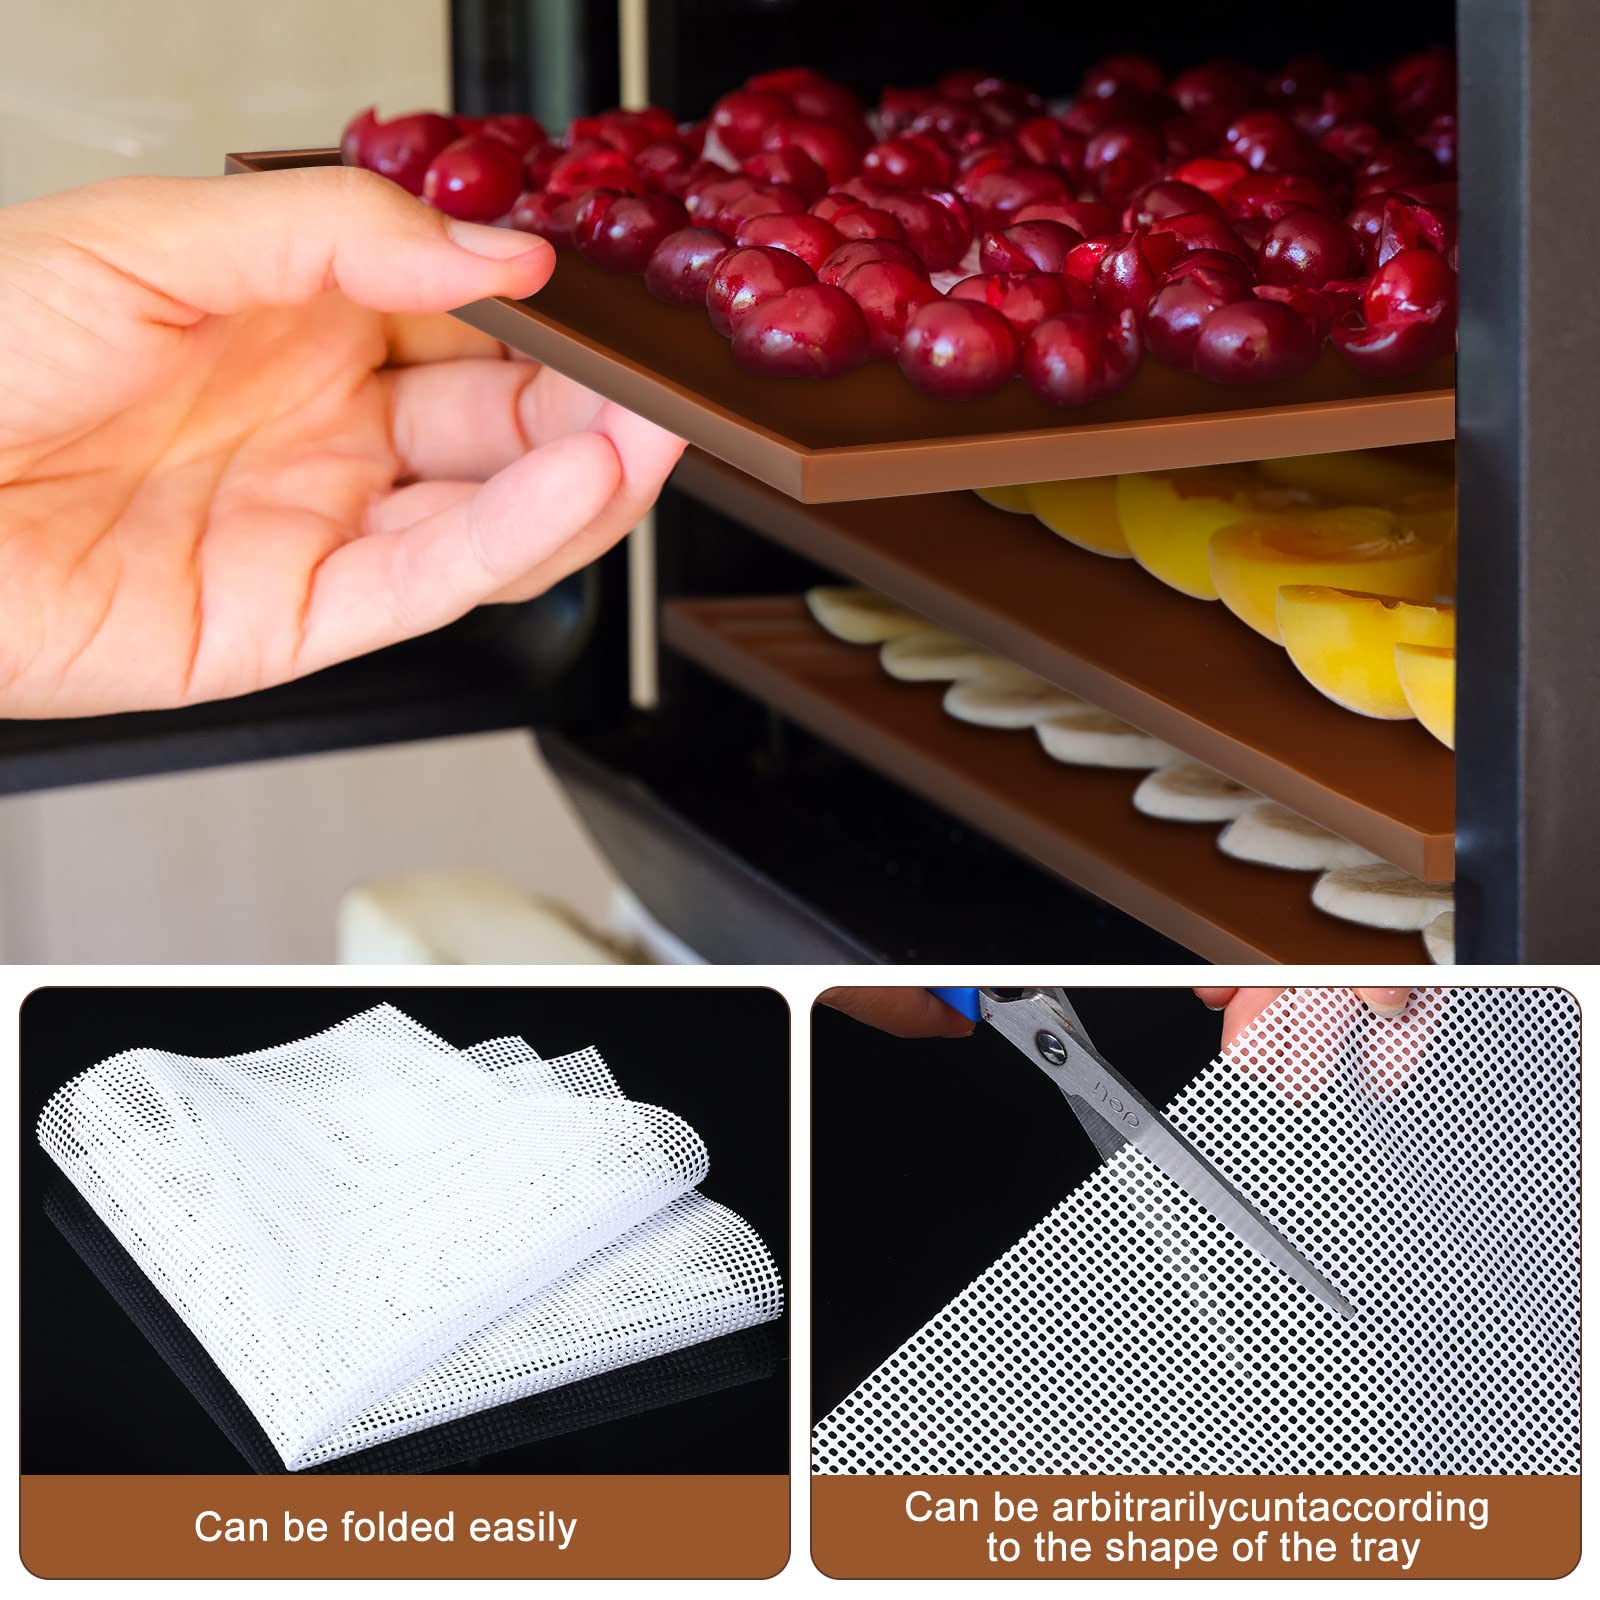 8 Pcs Silicone Dehydrator Mats 10 Pcs Mesh Screen Dehydrator Sheets Nonstick Reusable Fruit Dryer Trays for Jerky Fruit Herbs Flax Crackers Crust Tray